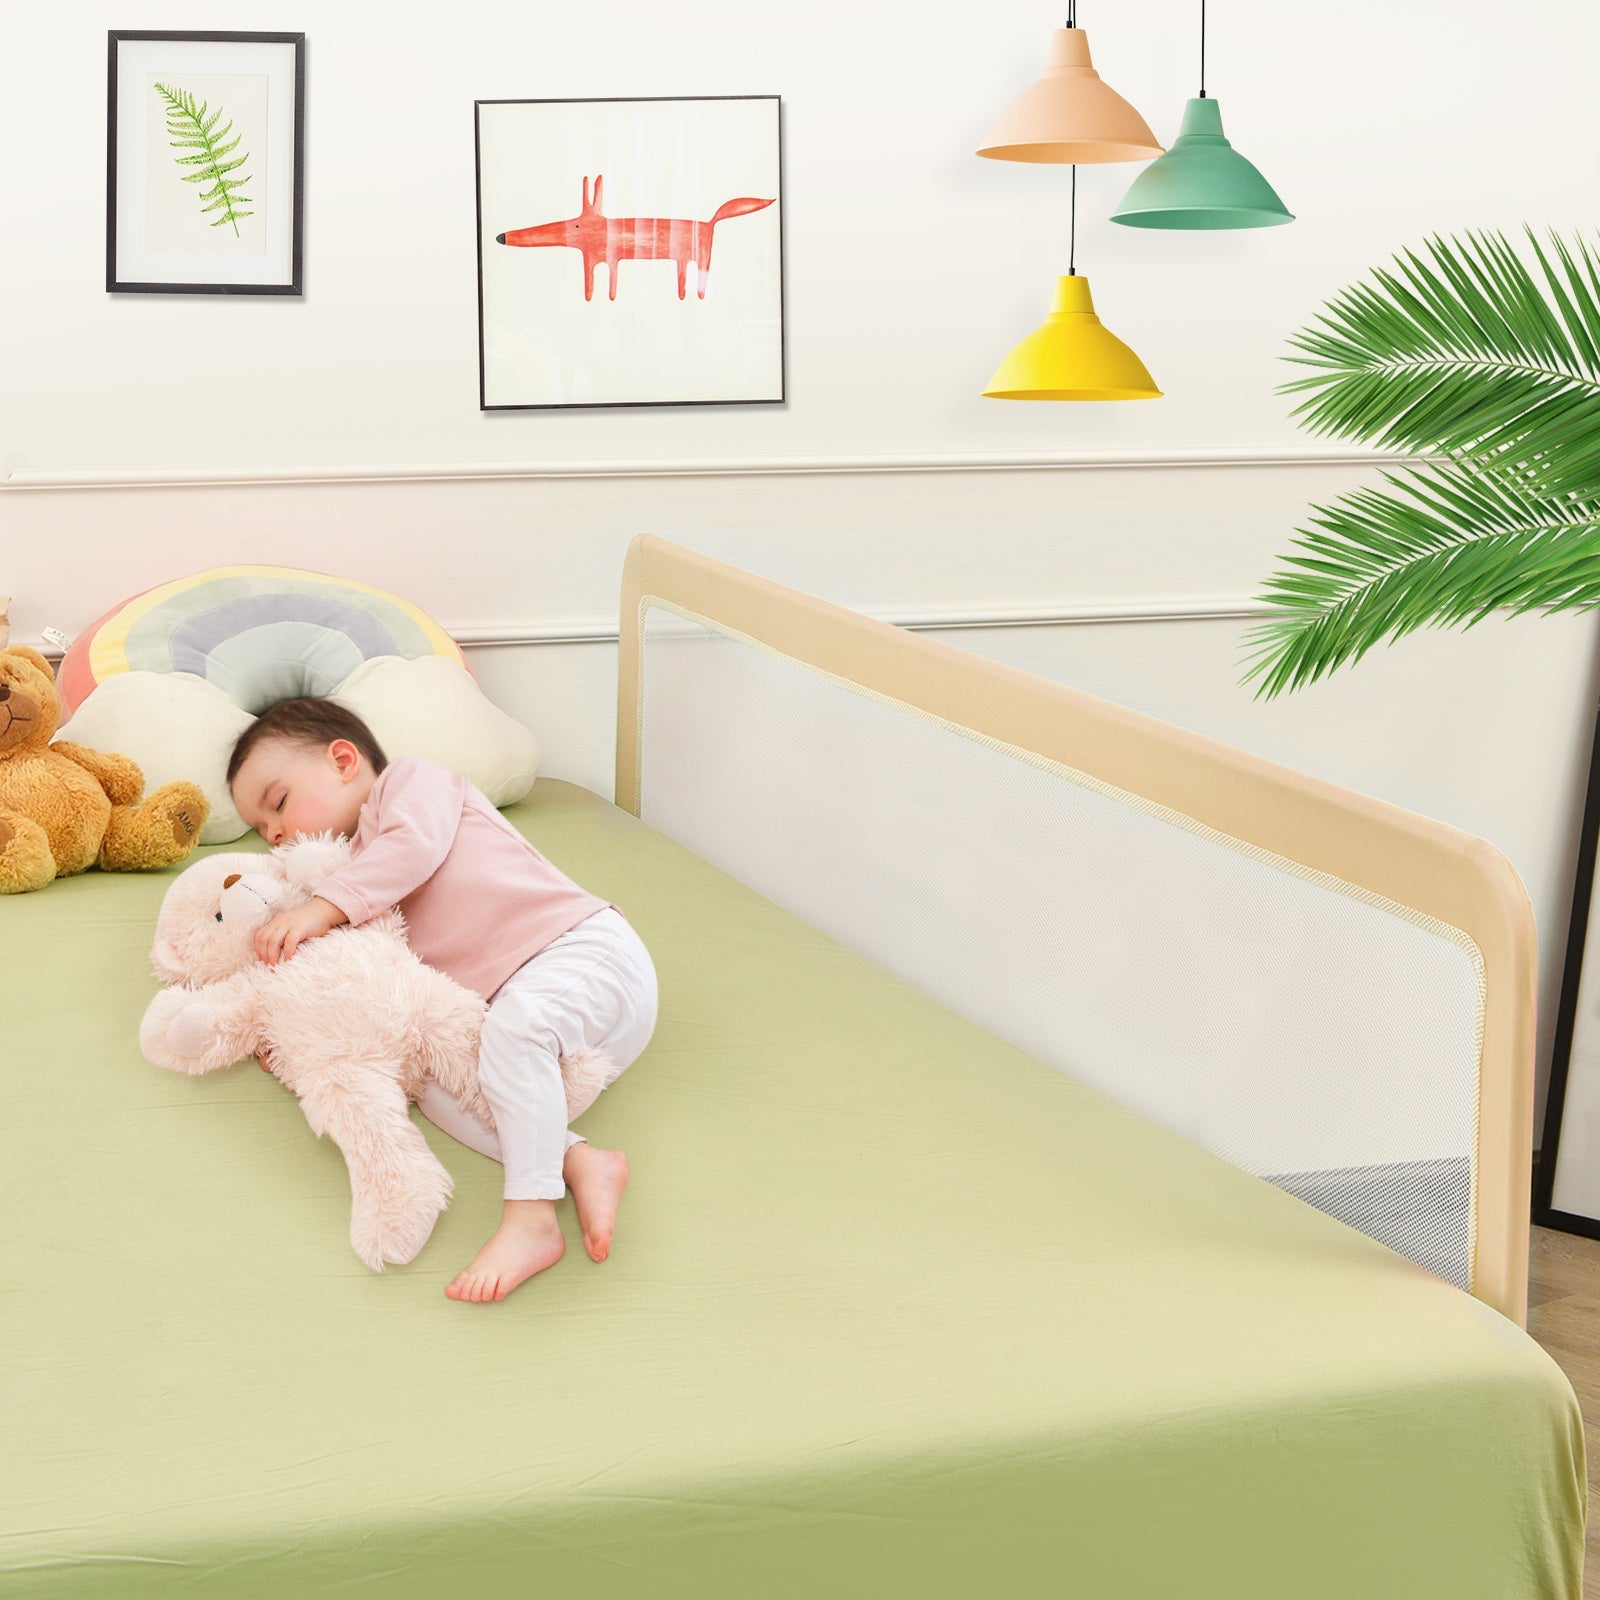 Foldable Beige Bed Rail for Toddlers - Mesh, Enhanced Safety Straps